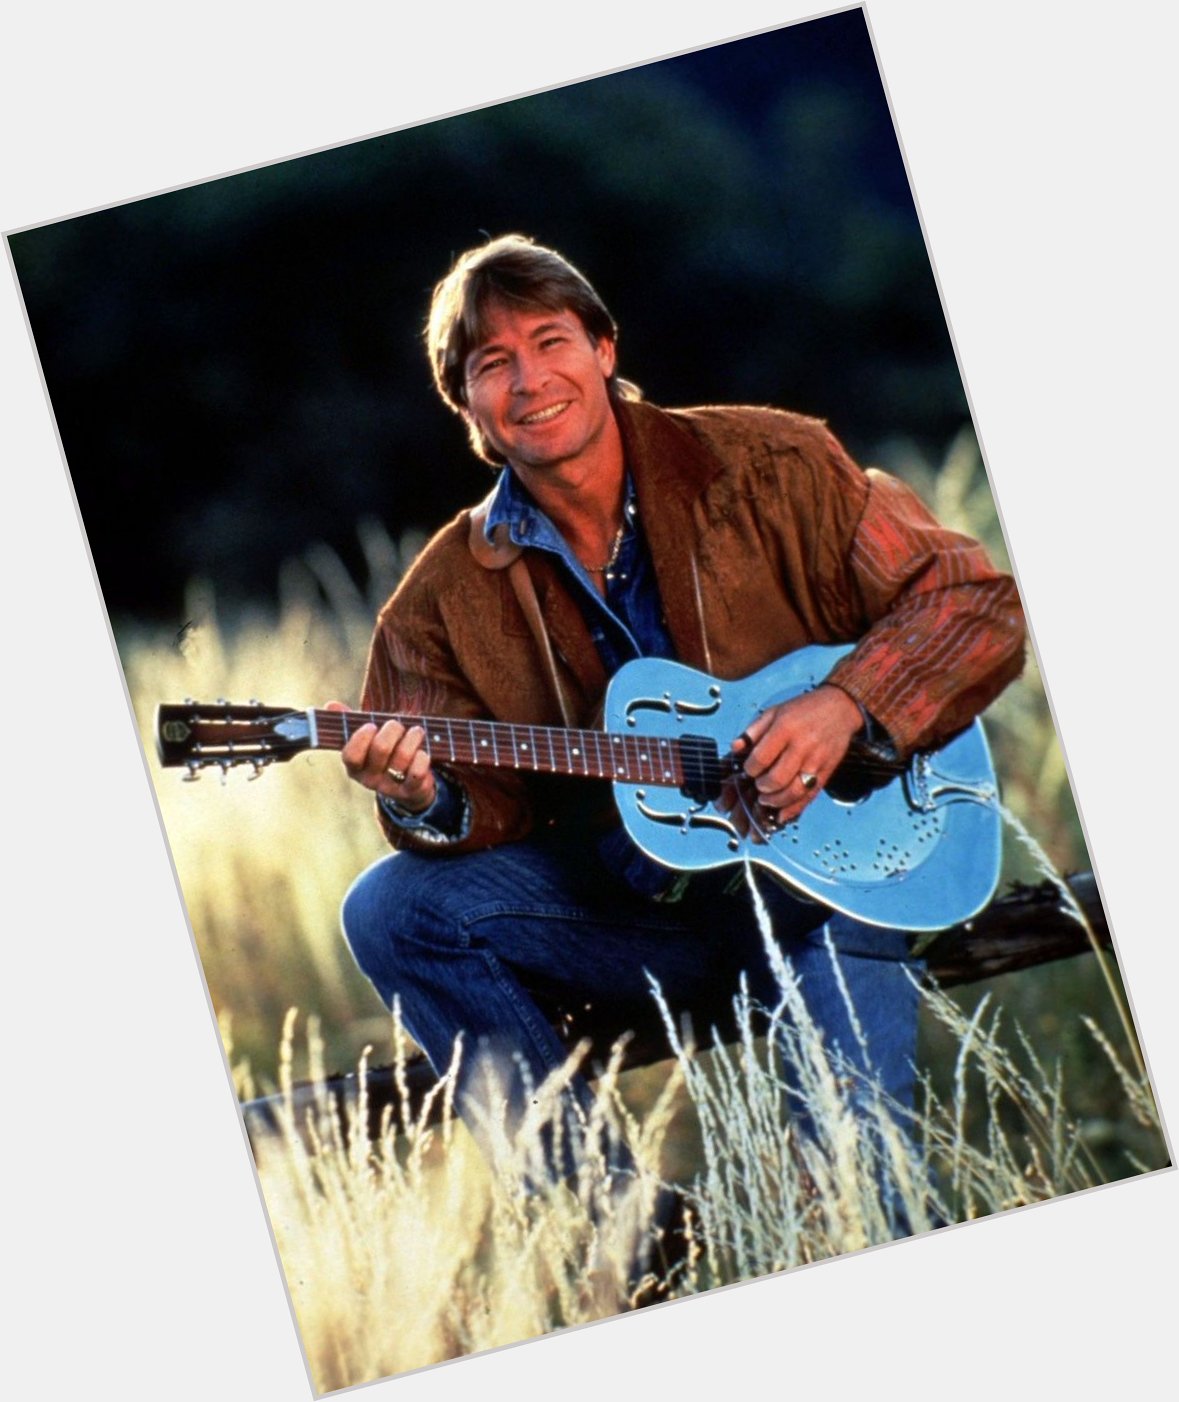 Happy Birthday John Denver! Sad the country roads took you home too early. 